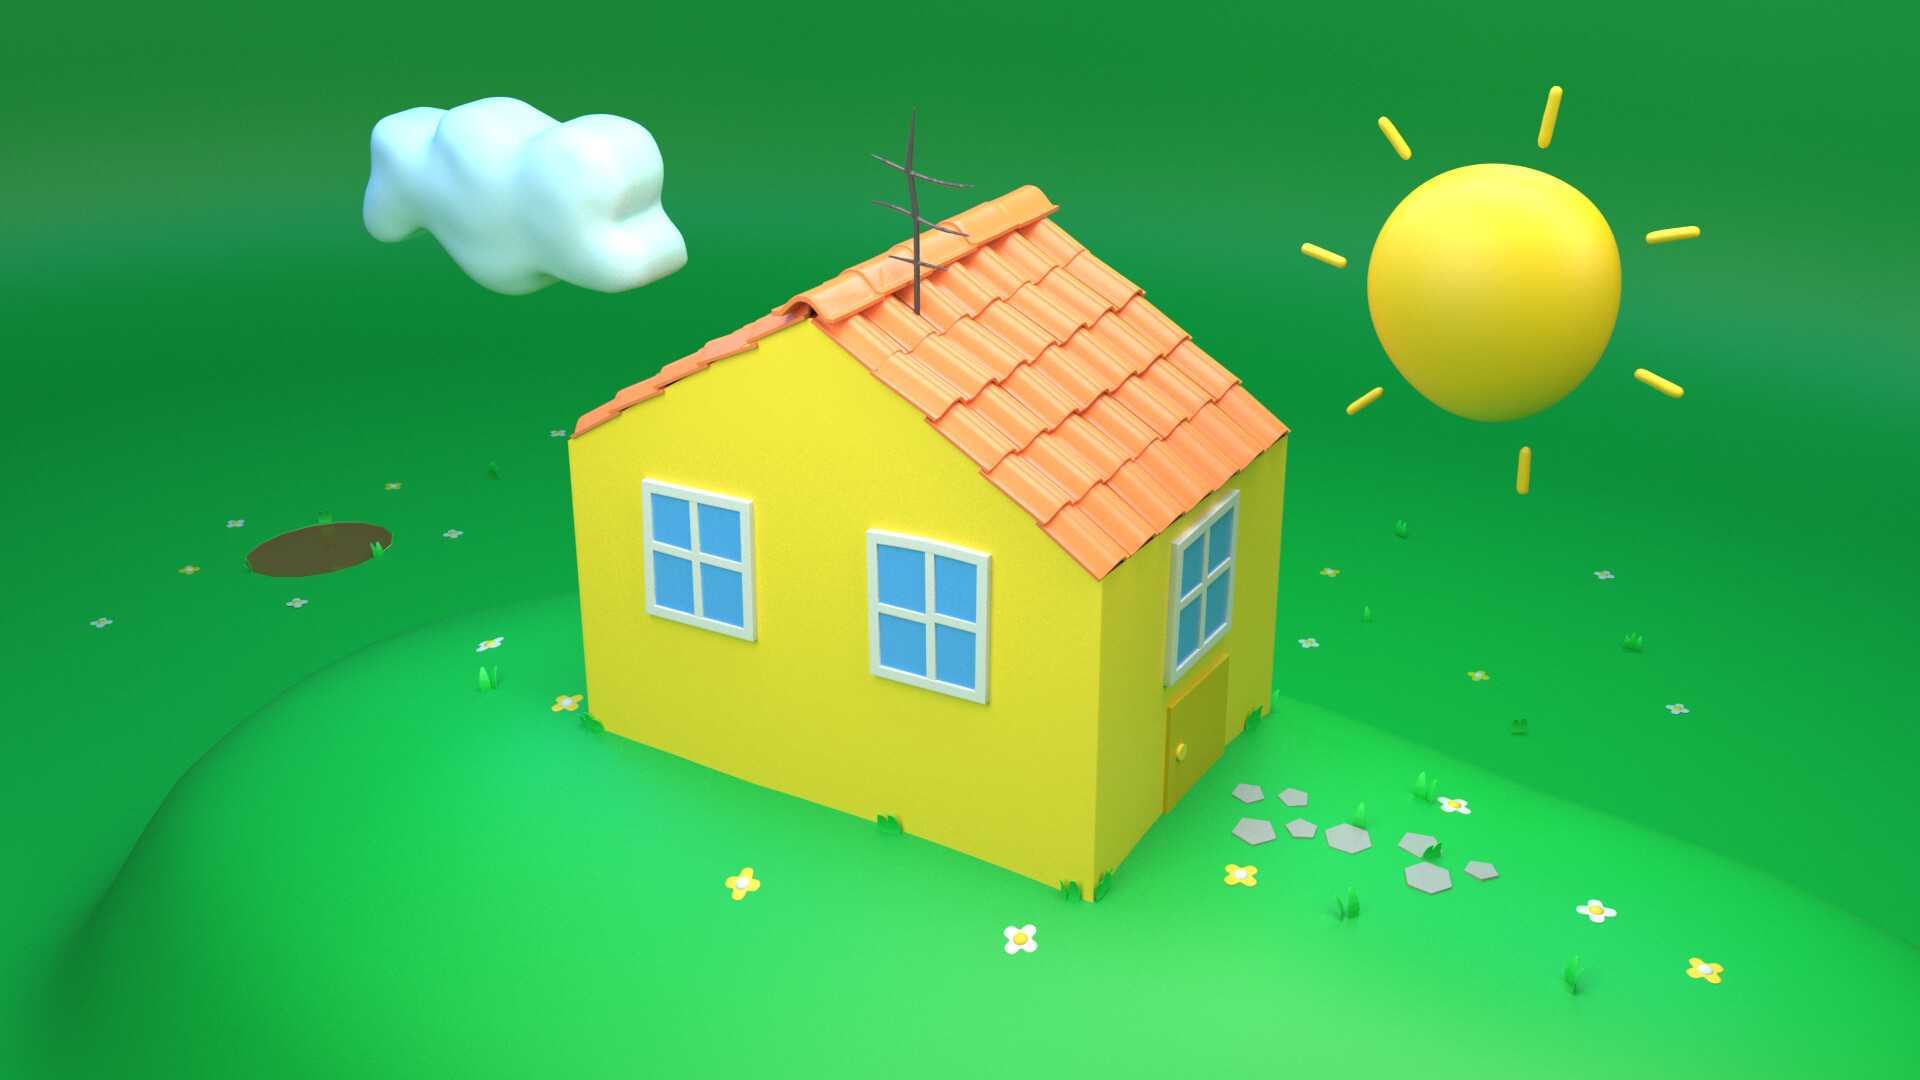 Peppa Pig House Wallpaper - Scary Peppa Pig Wallpapers Wallpaper Cave